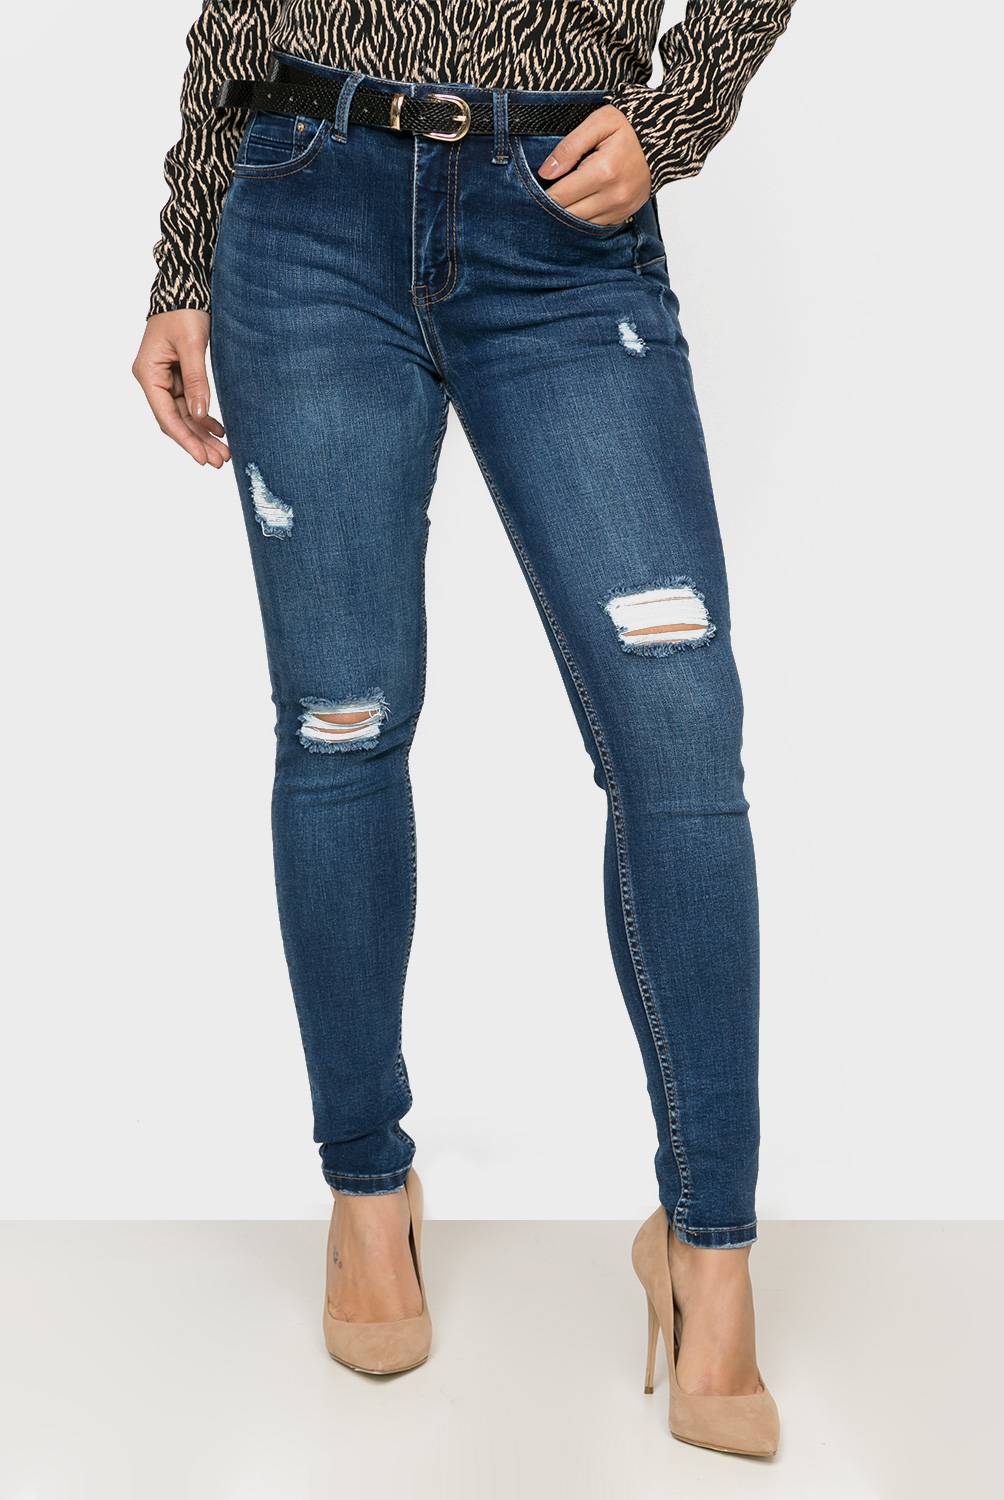 MOSSIMO - Jeans Skinny Mujer